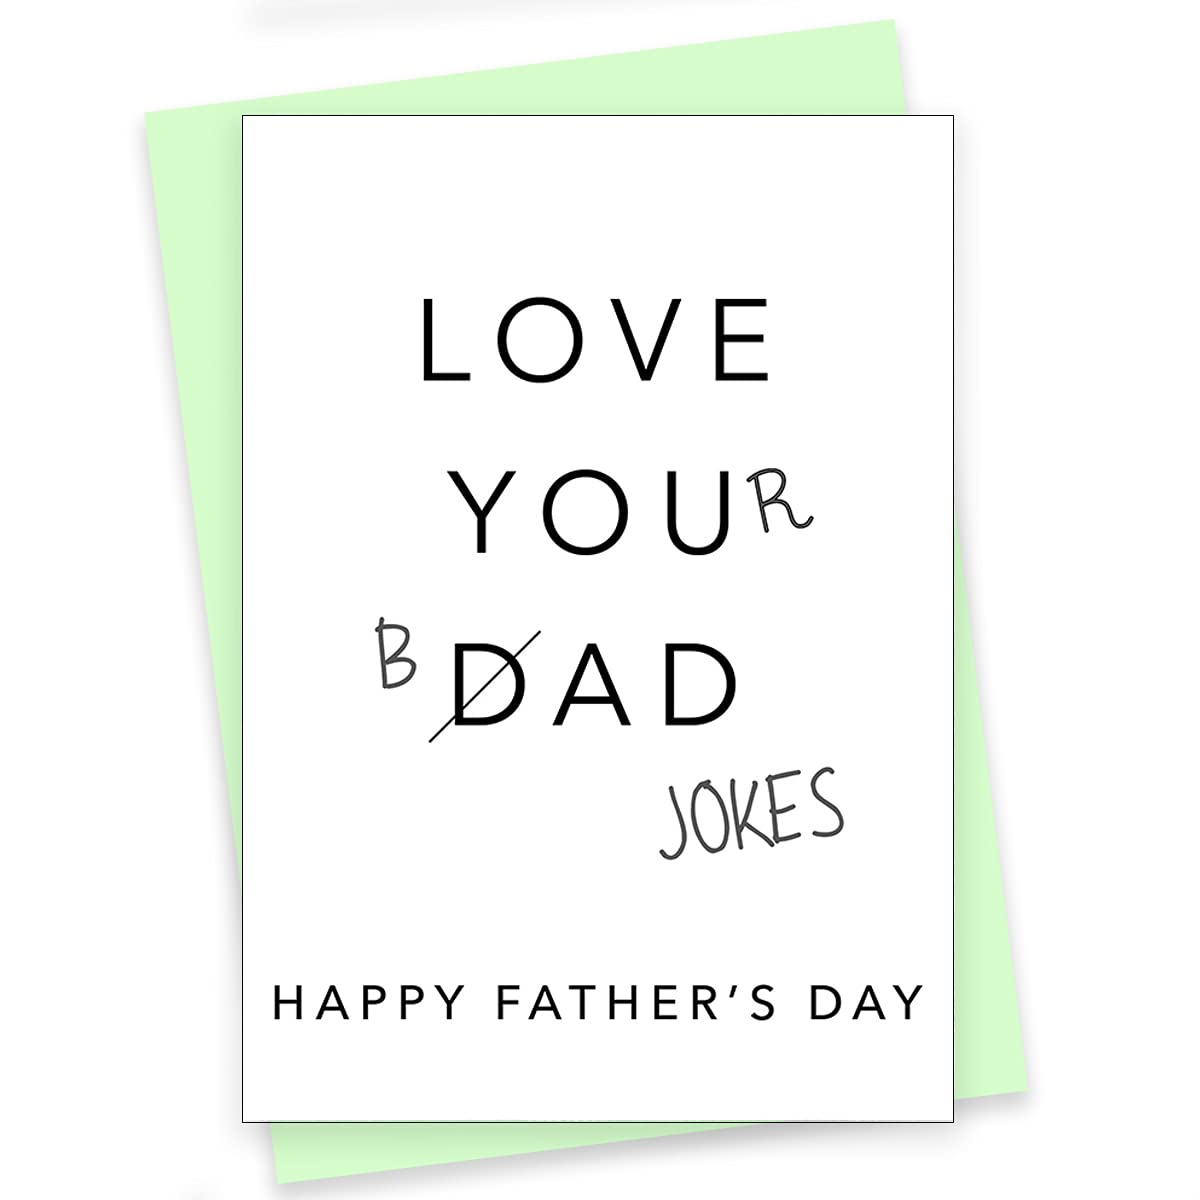 Rack Jack Father's Day Funny Greeting Card - Love Your Bad Jokes